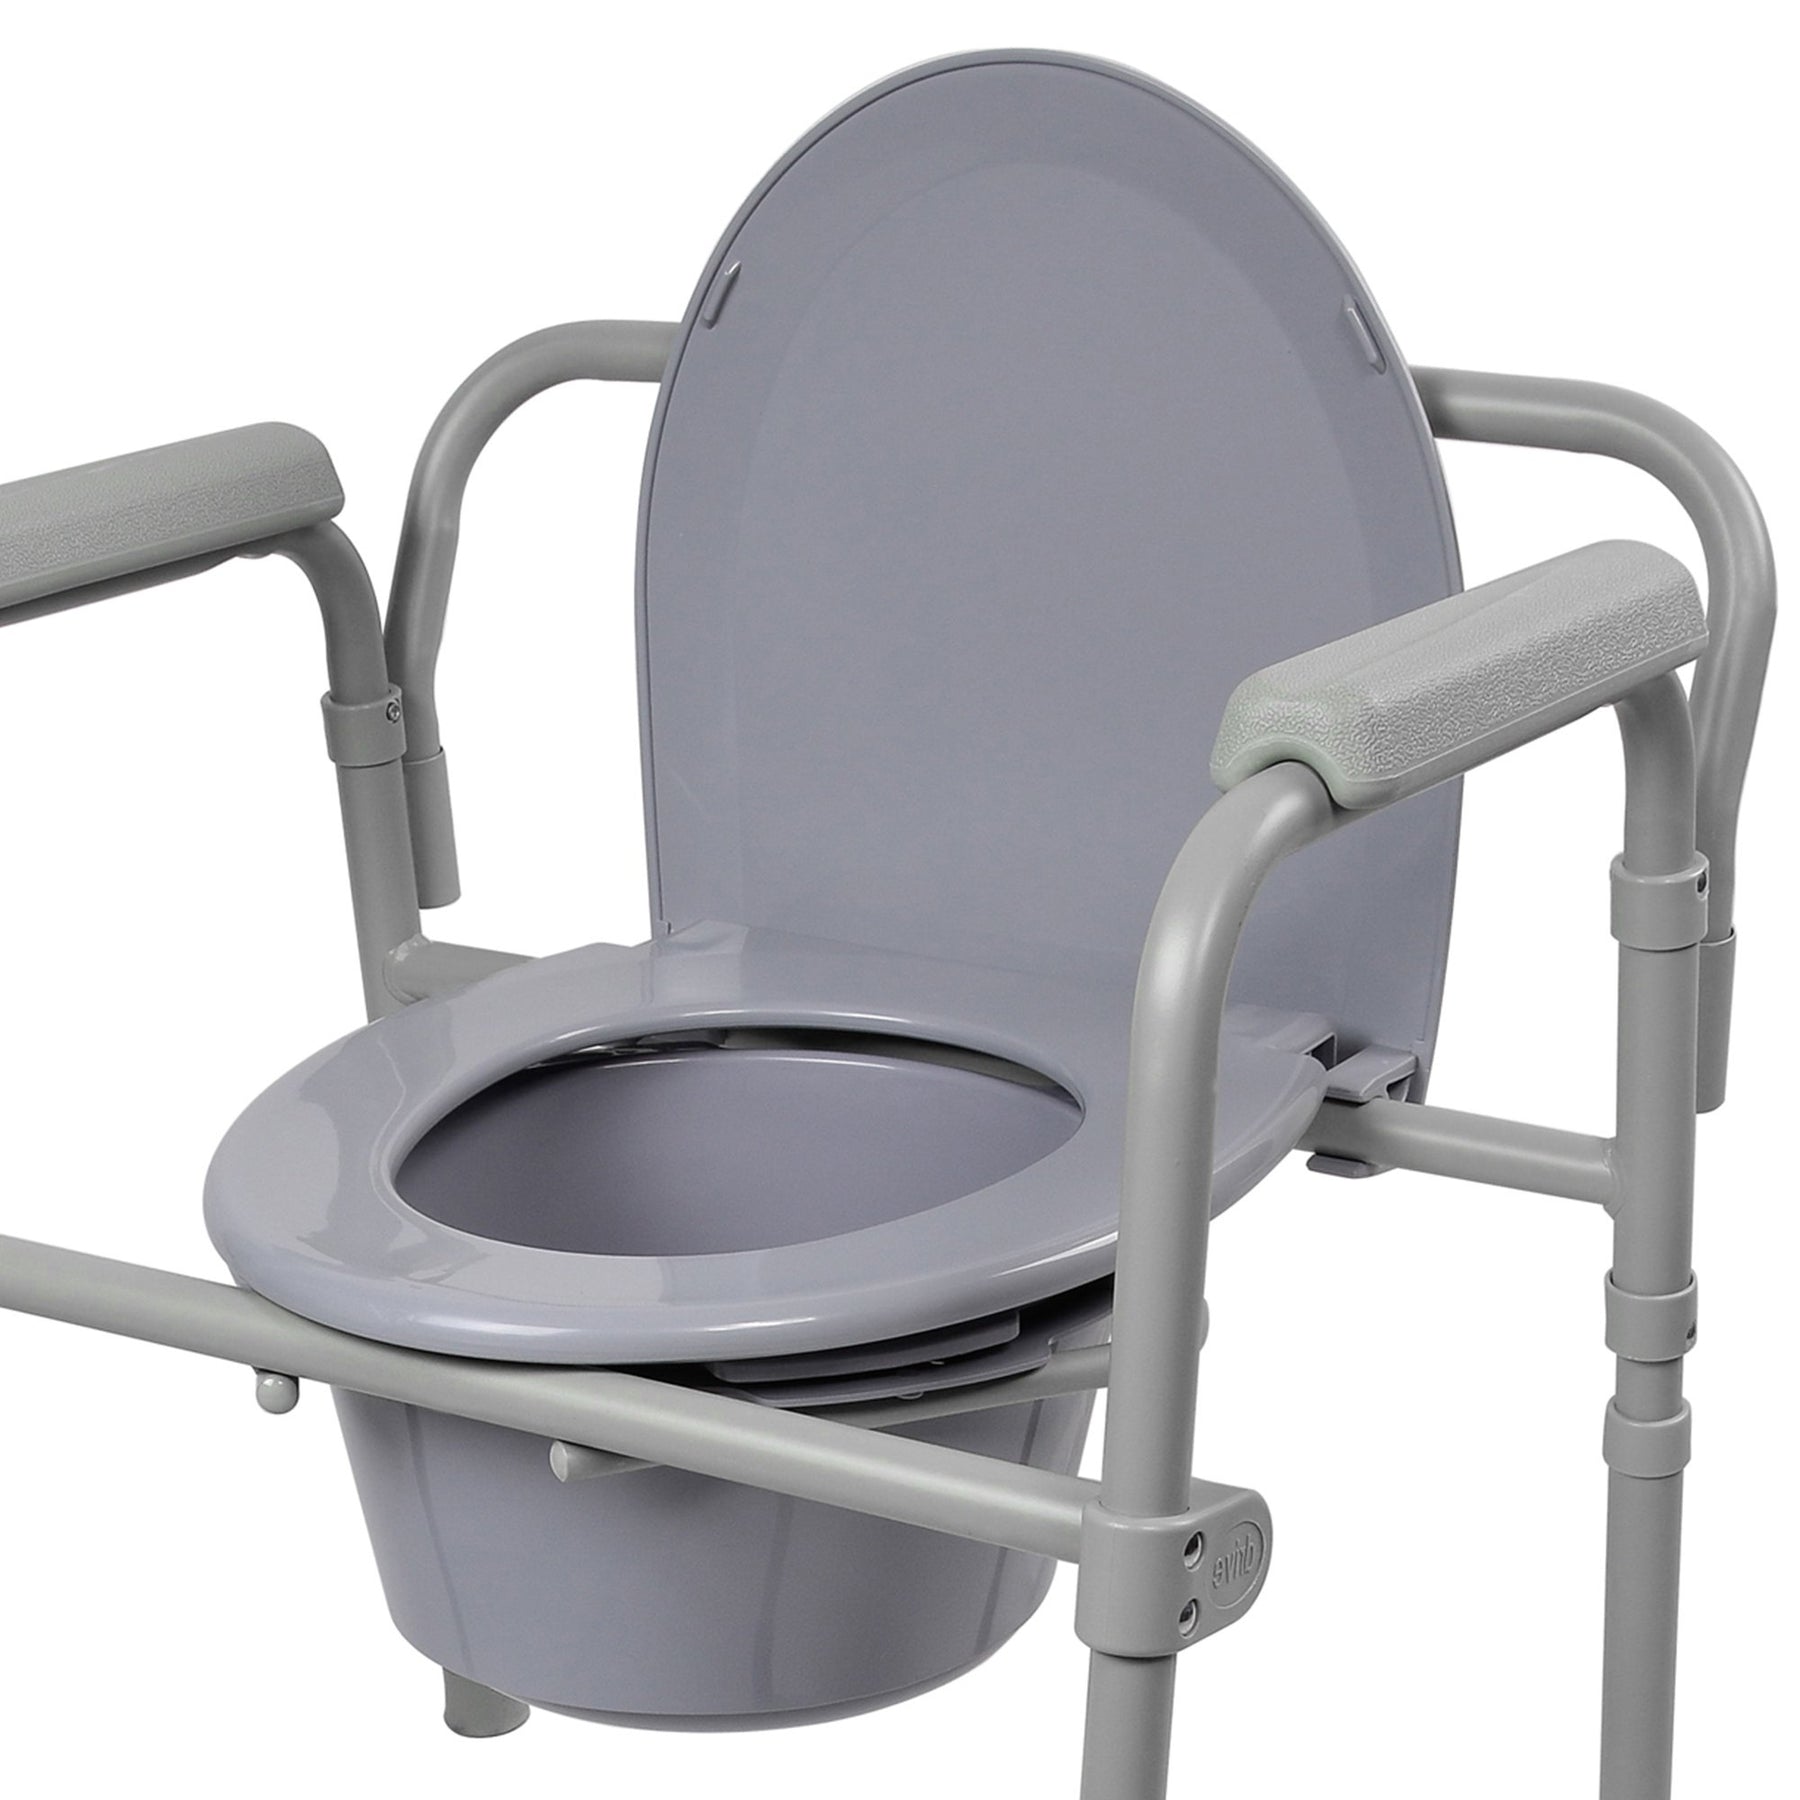 Standard Commode with Arm Rests